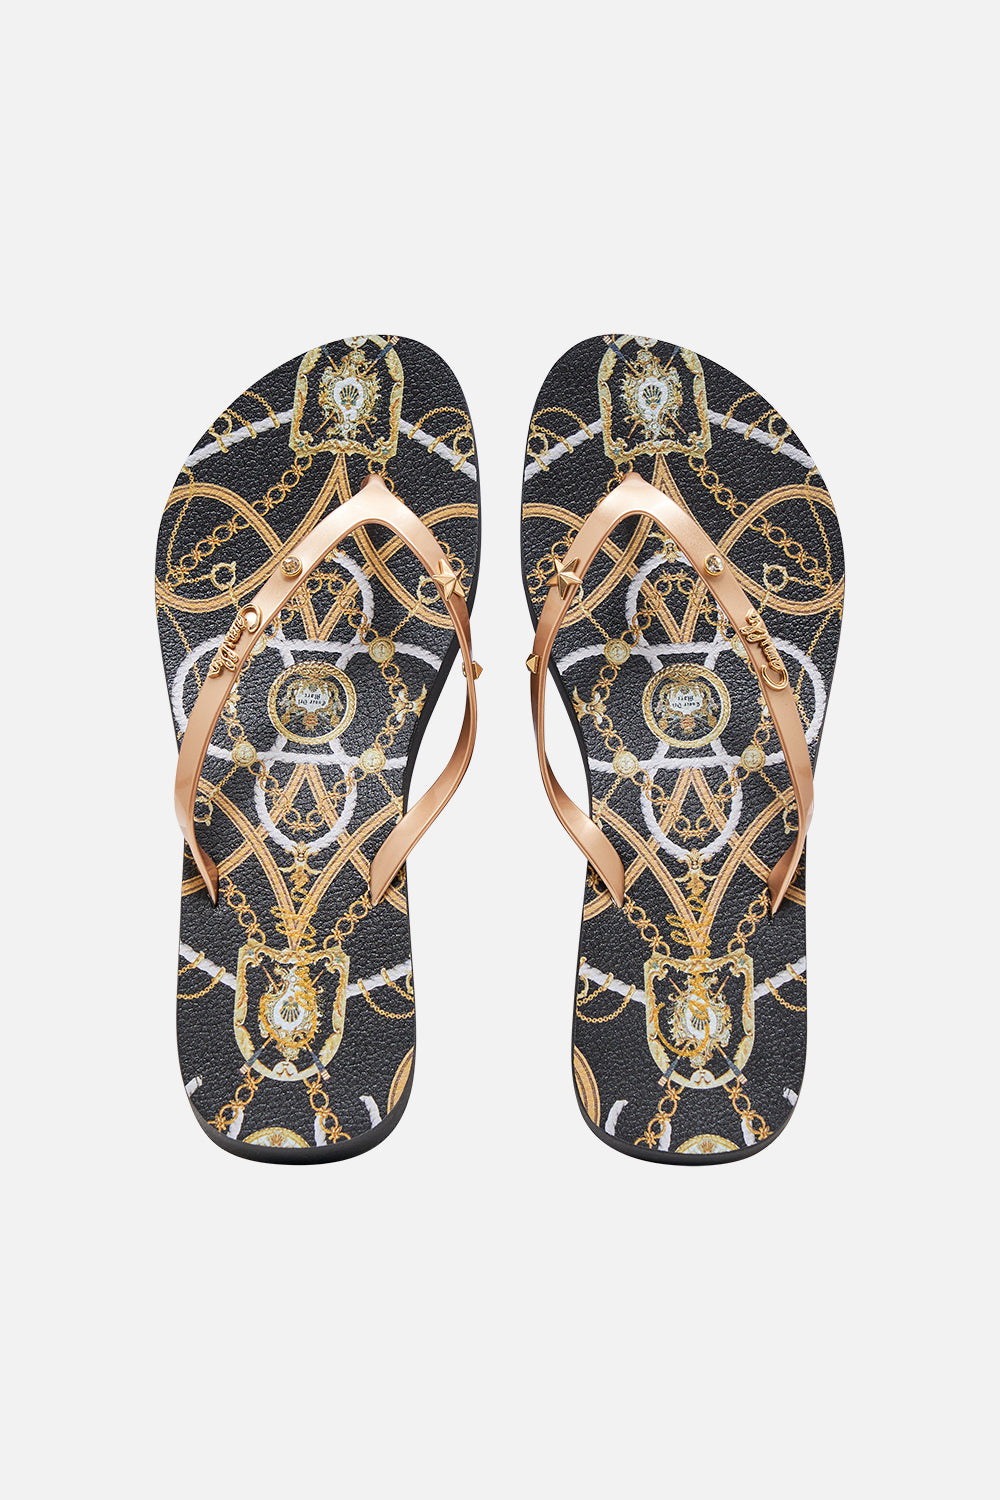 Product view of CAMILLA platform thngs in Reservation For Love print